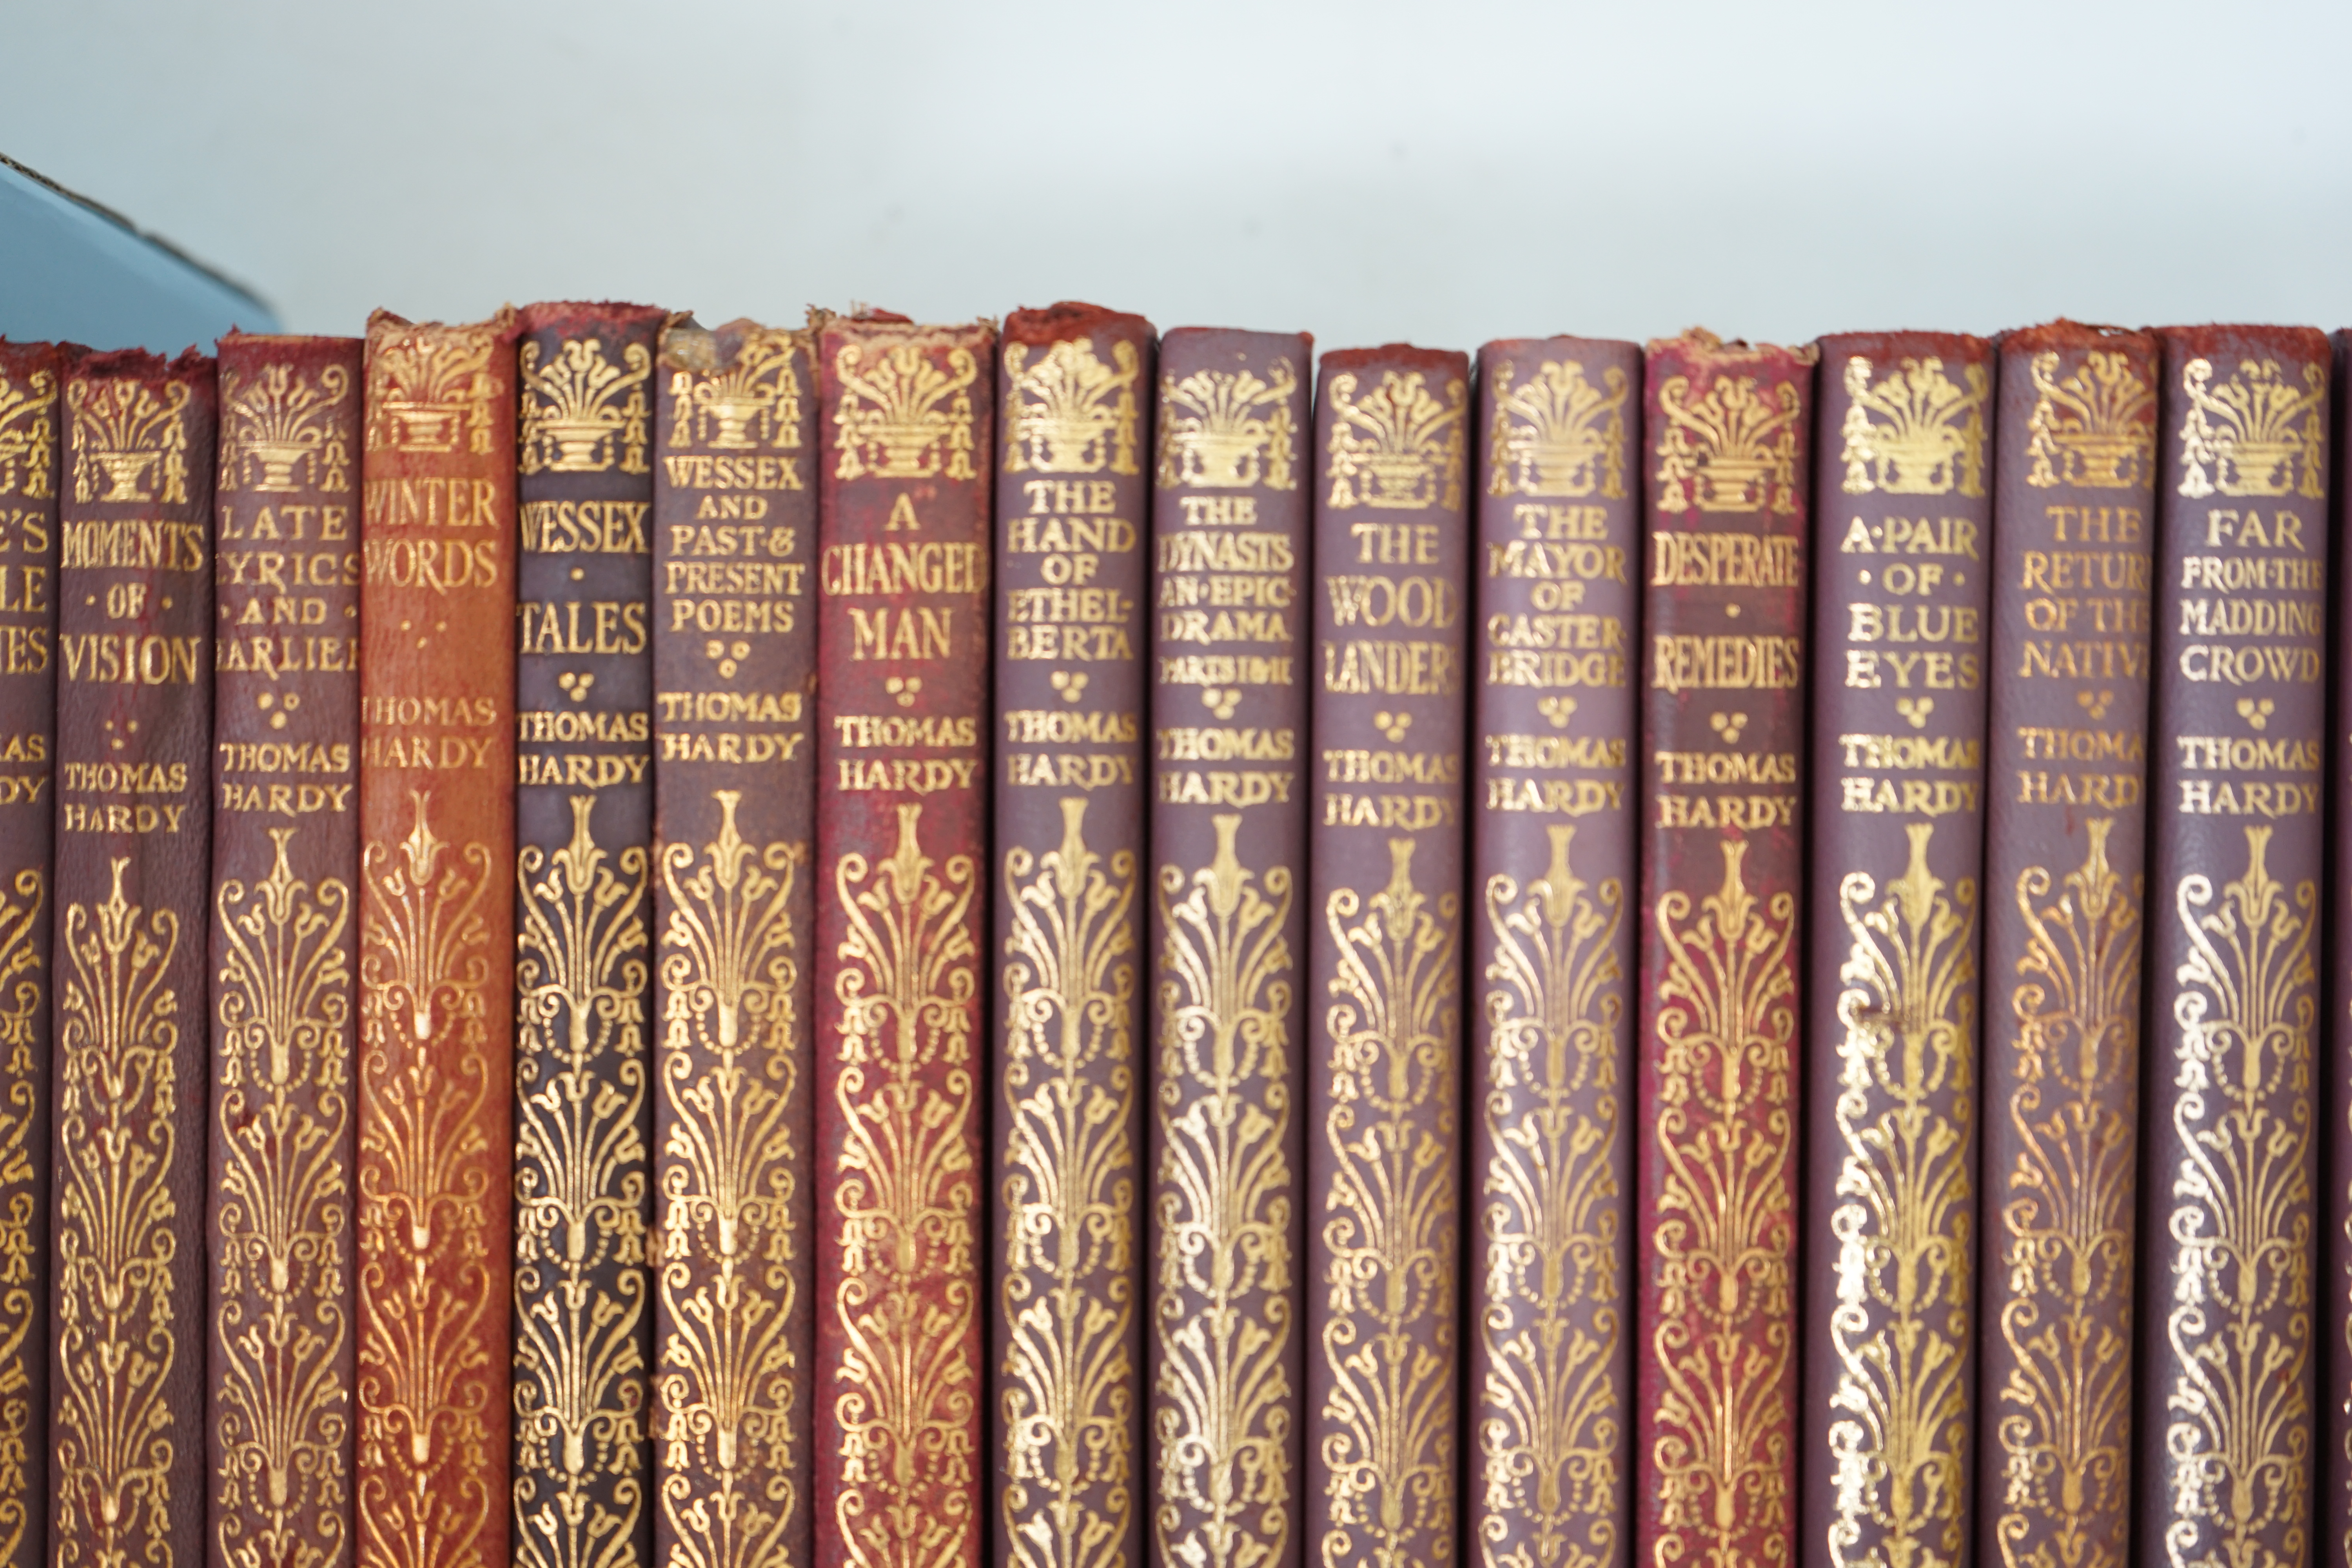 Hardy, Thomas - The Works, a harlequin pocket set edition of 17 vols, 12mo, in red leather gilt bindings, Macmillan and Co., London, 1925- 1941